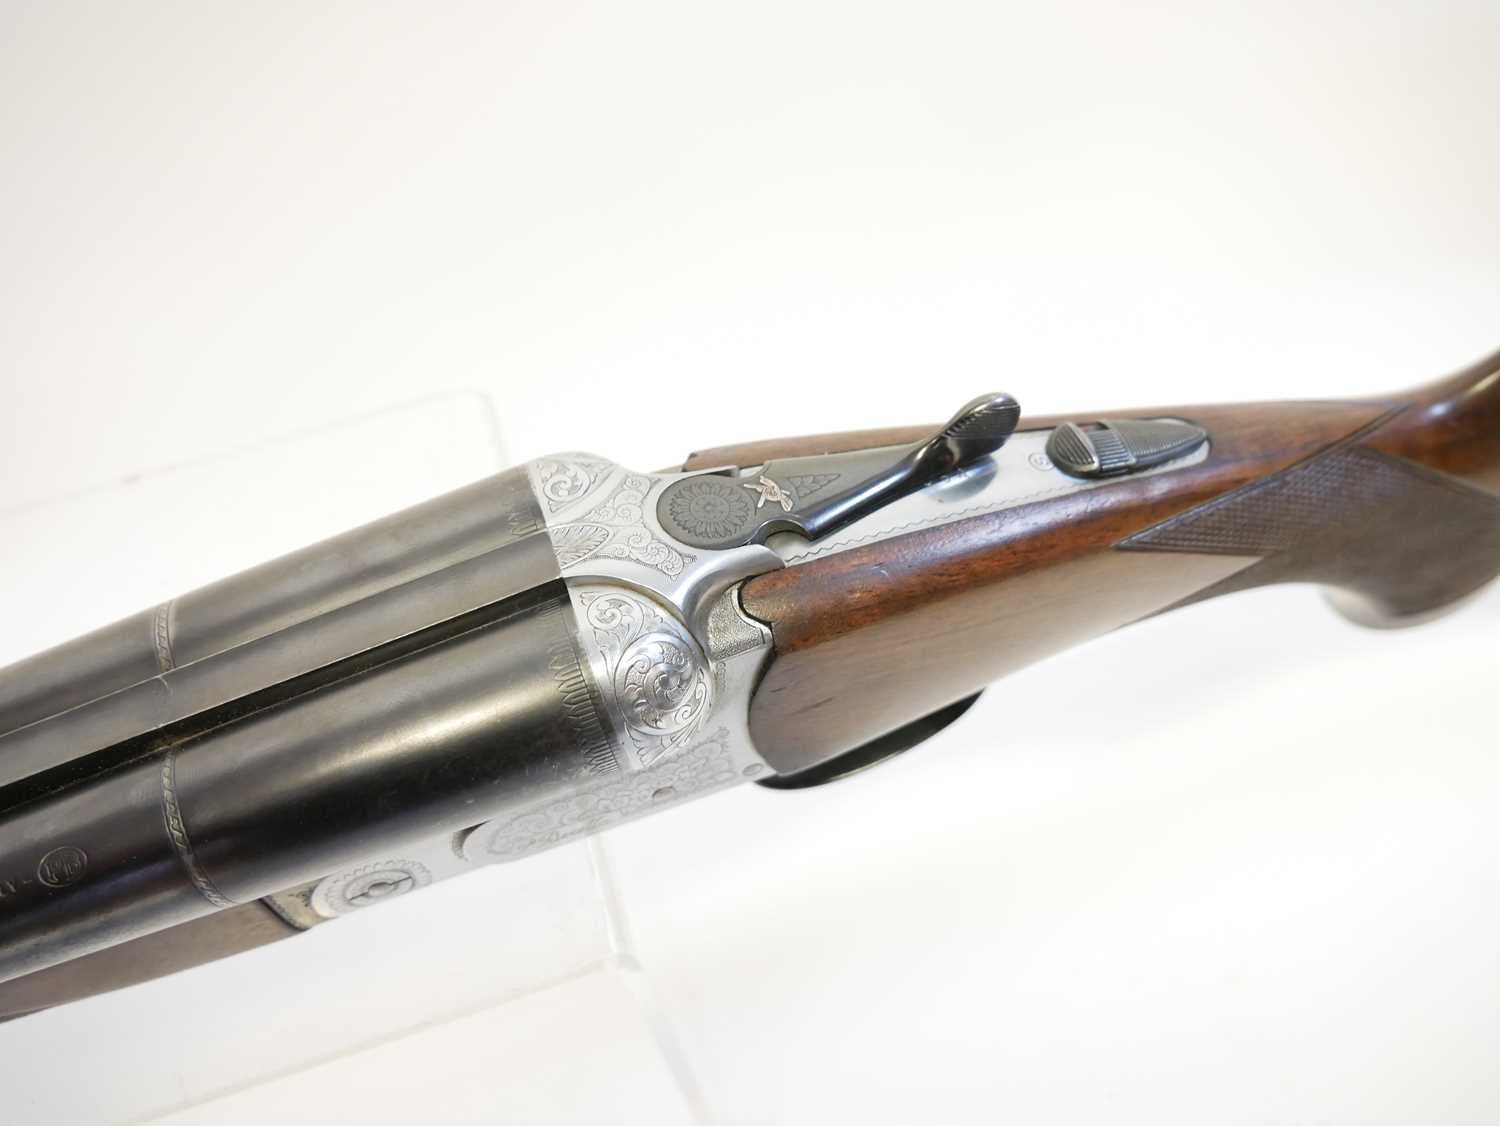 Beretta 12 bore side by side Model 626E shotgun, serial number A40366A, 28inch barrels with half and - Image 10 of 15